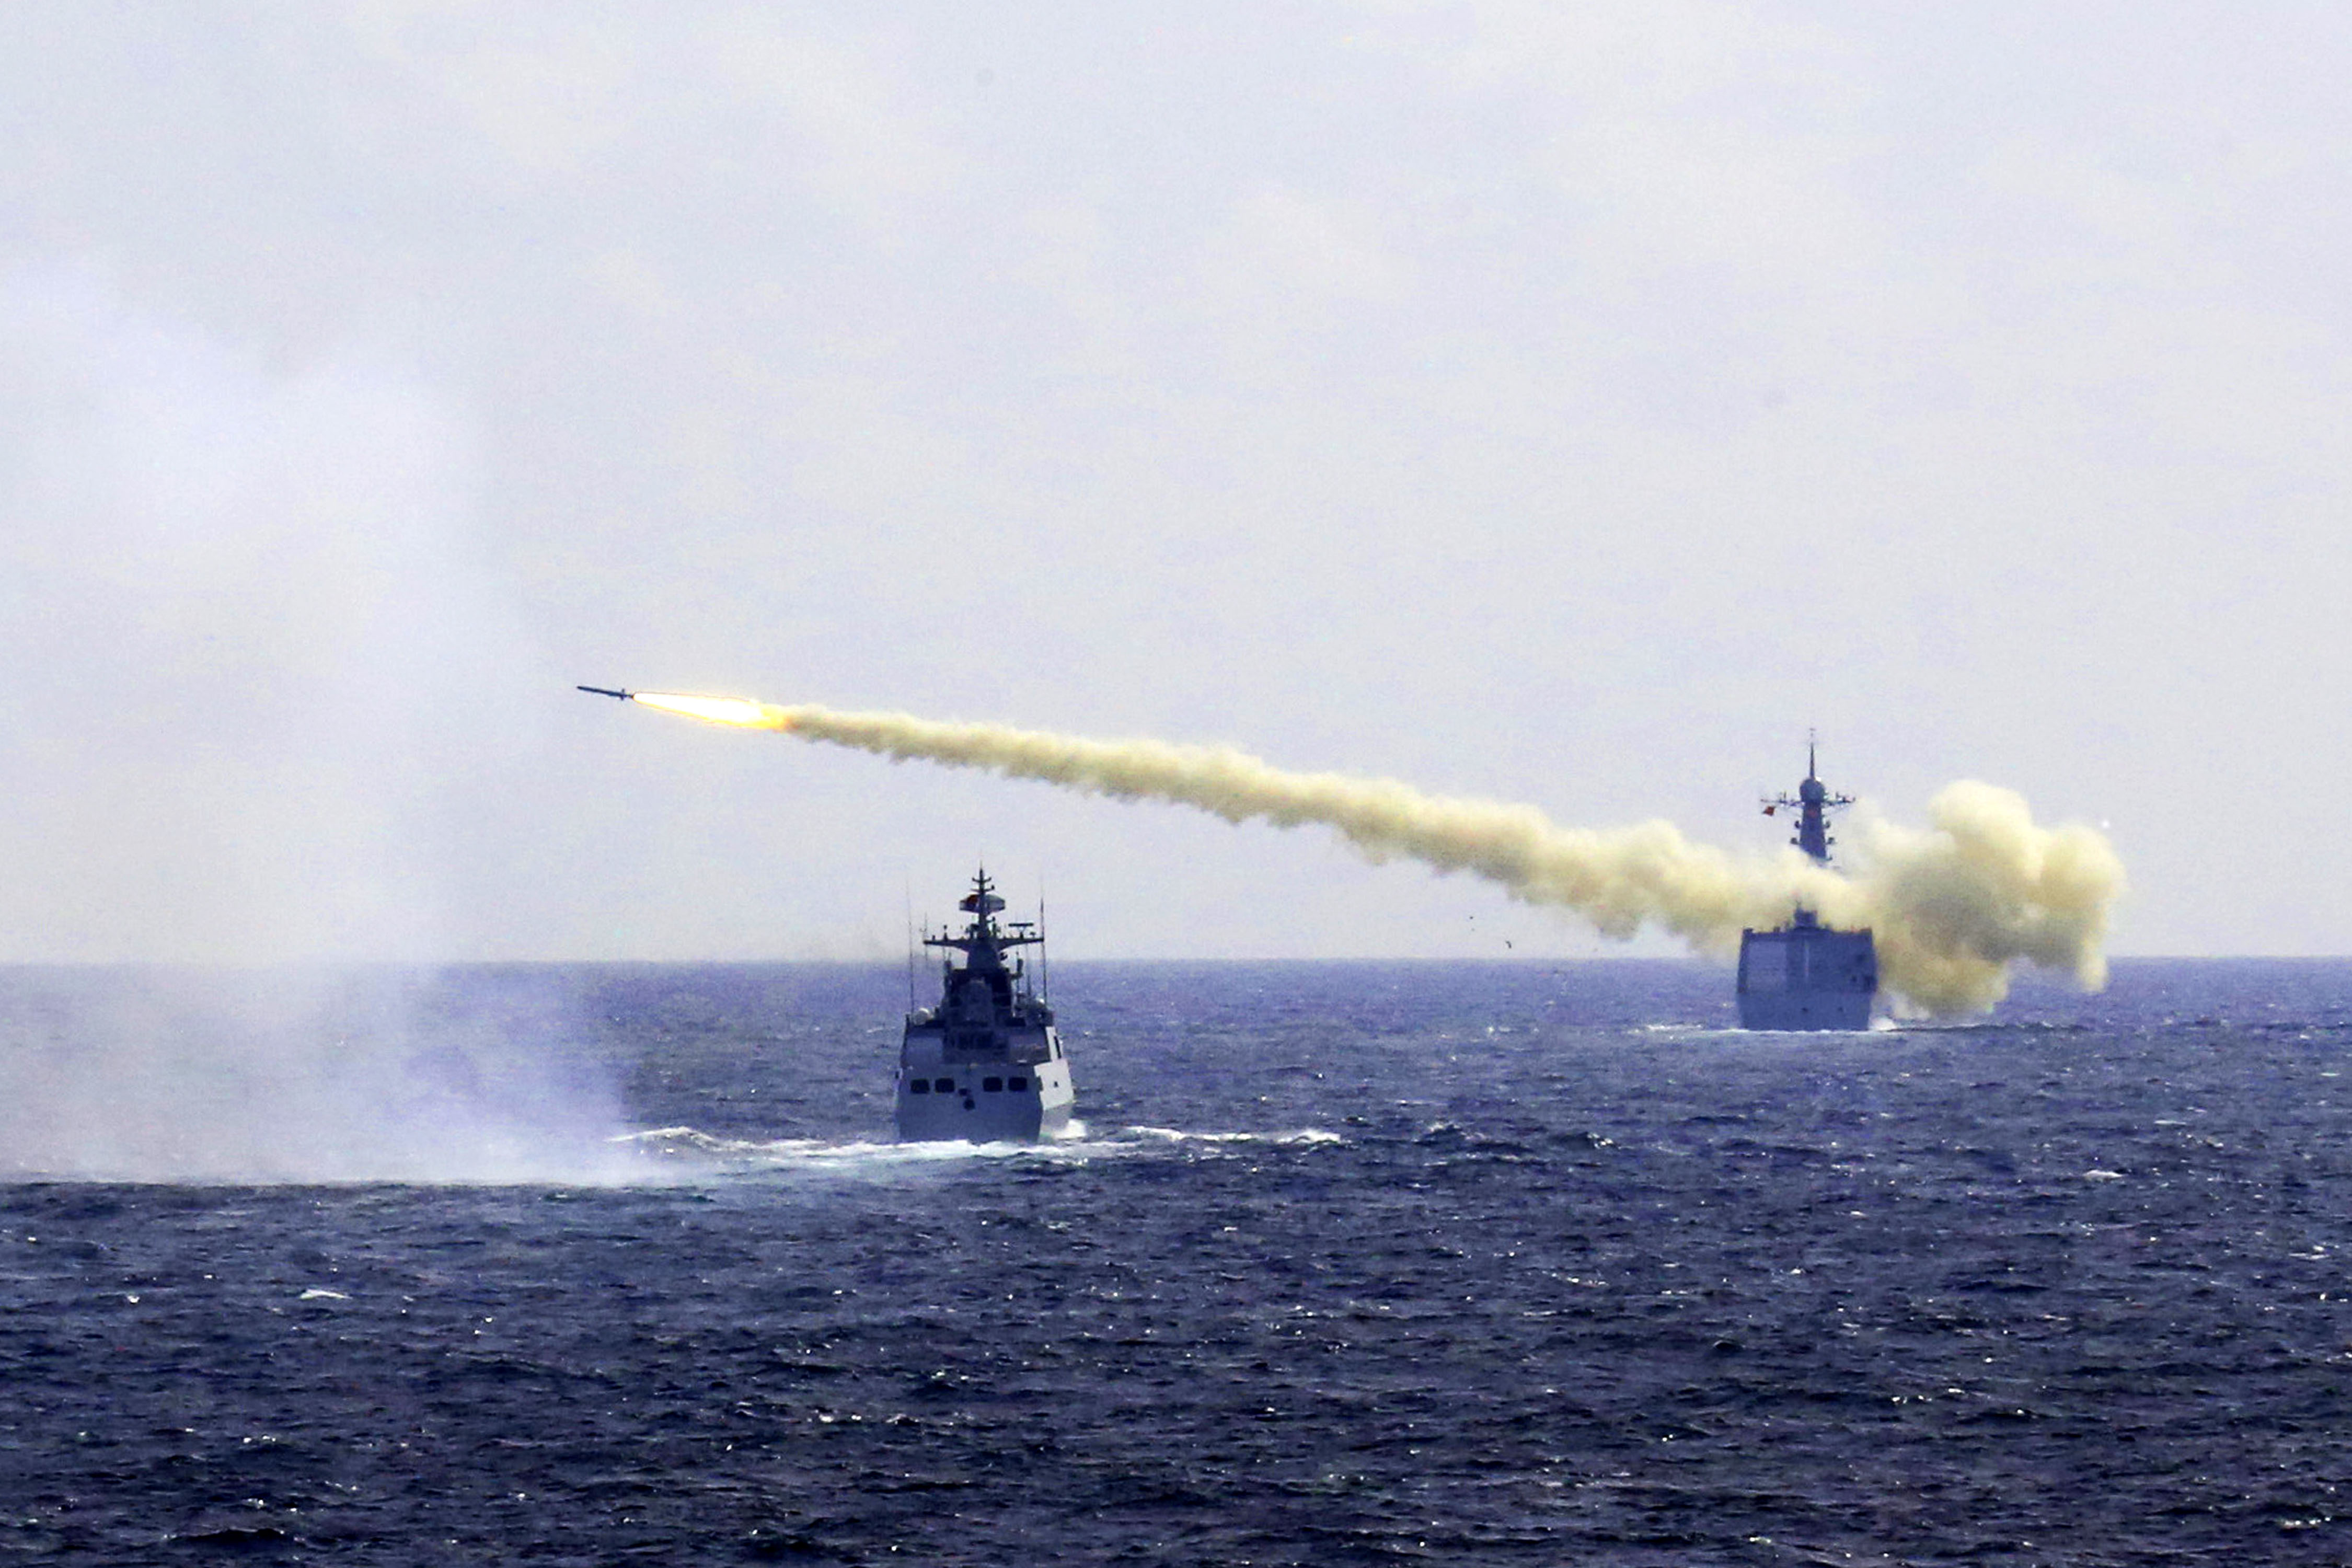 A missile is launched from a Chinese Navy ship during a live-ammunition drill in the East China Sea in this photo released Monday. | AP